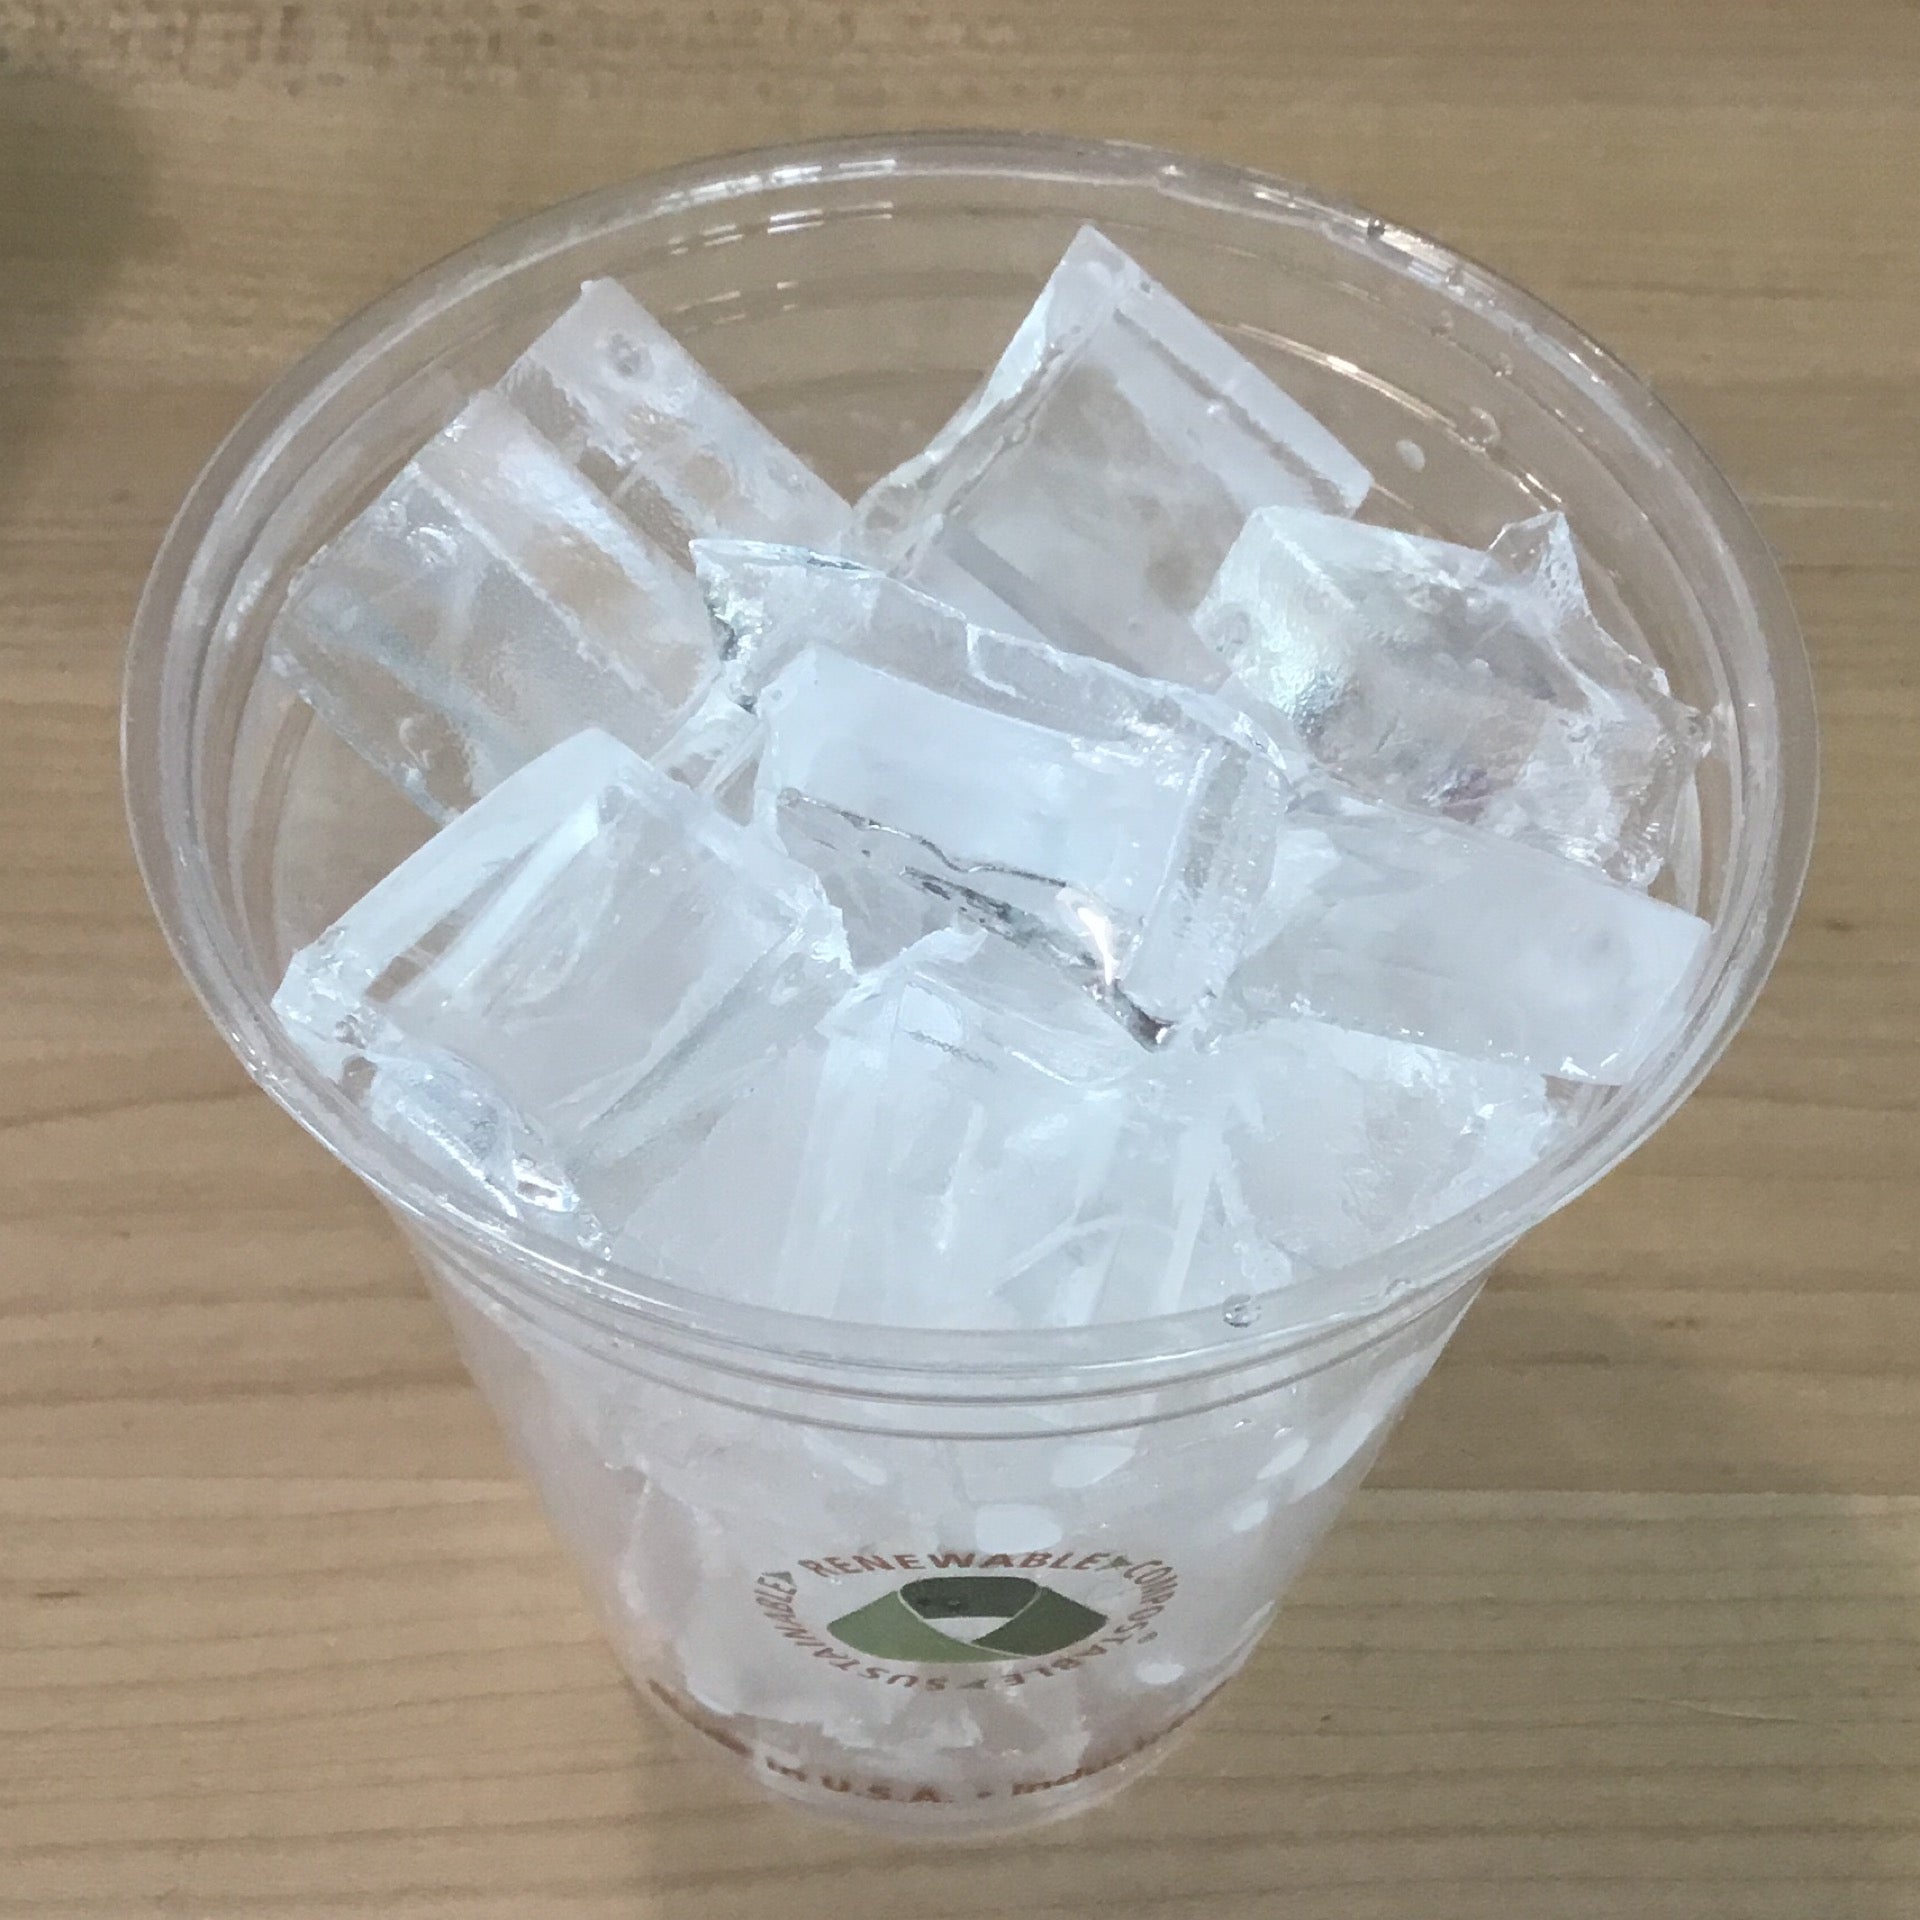 I found a sphere ice cup?! 😱🍉🧊 #icecup #koreanconveniencestore #kor, ice  cup in korea